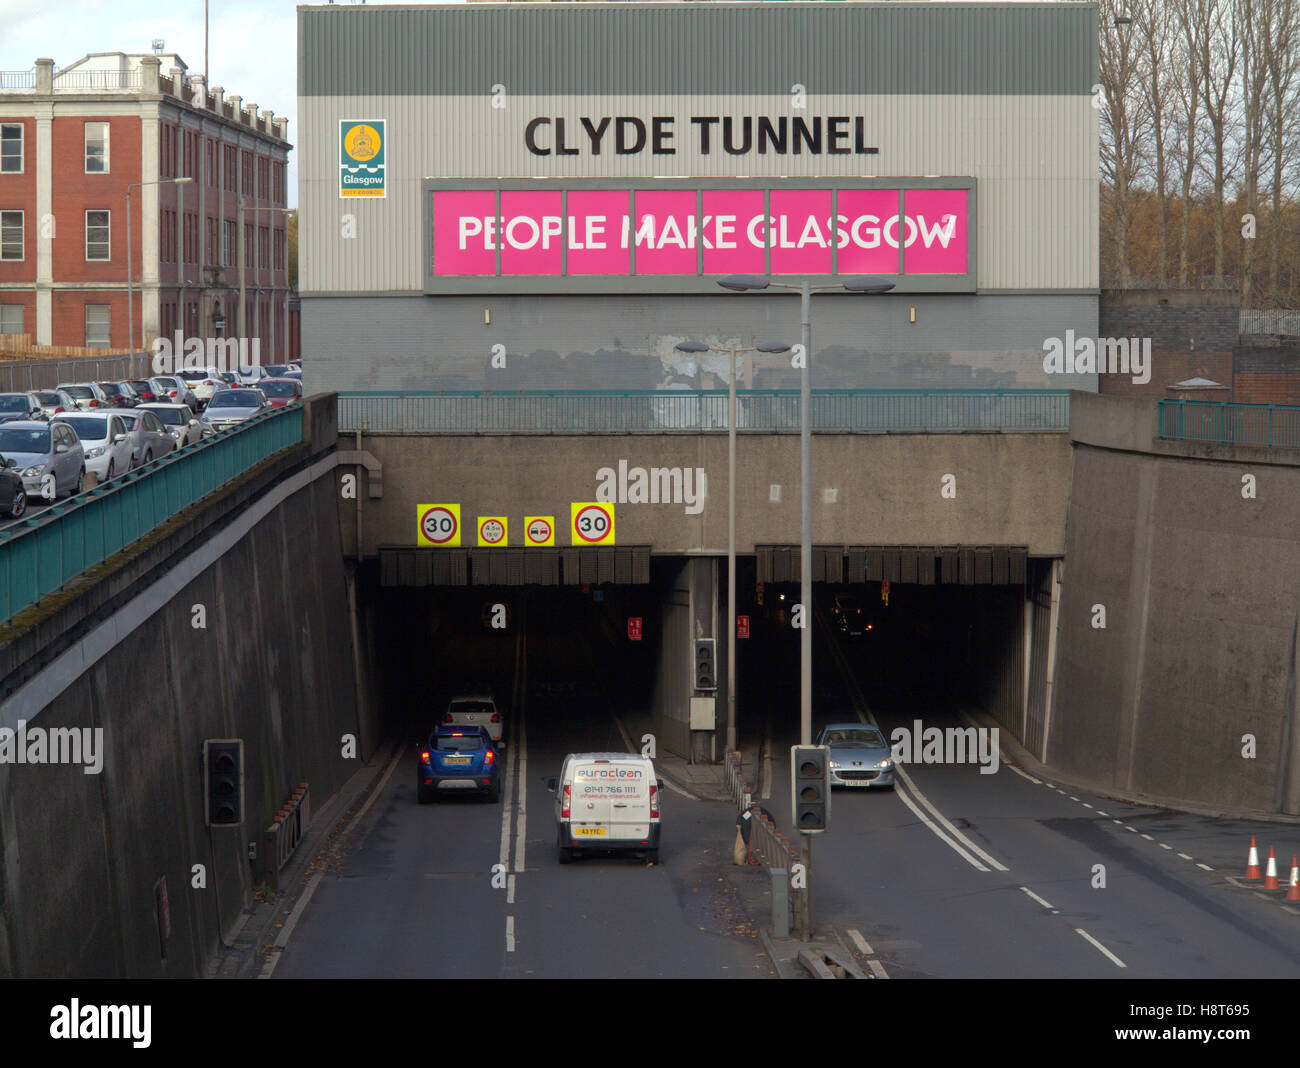 Clyde tunnel south entrance southern exit people make glasgow sign cars traffic Stock Photo